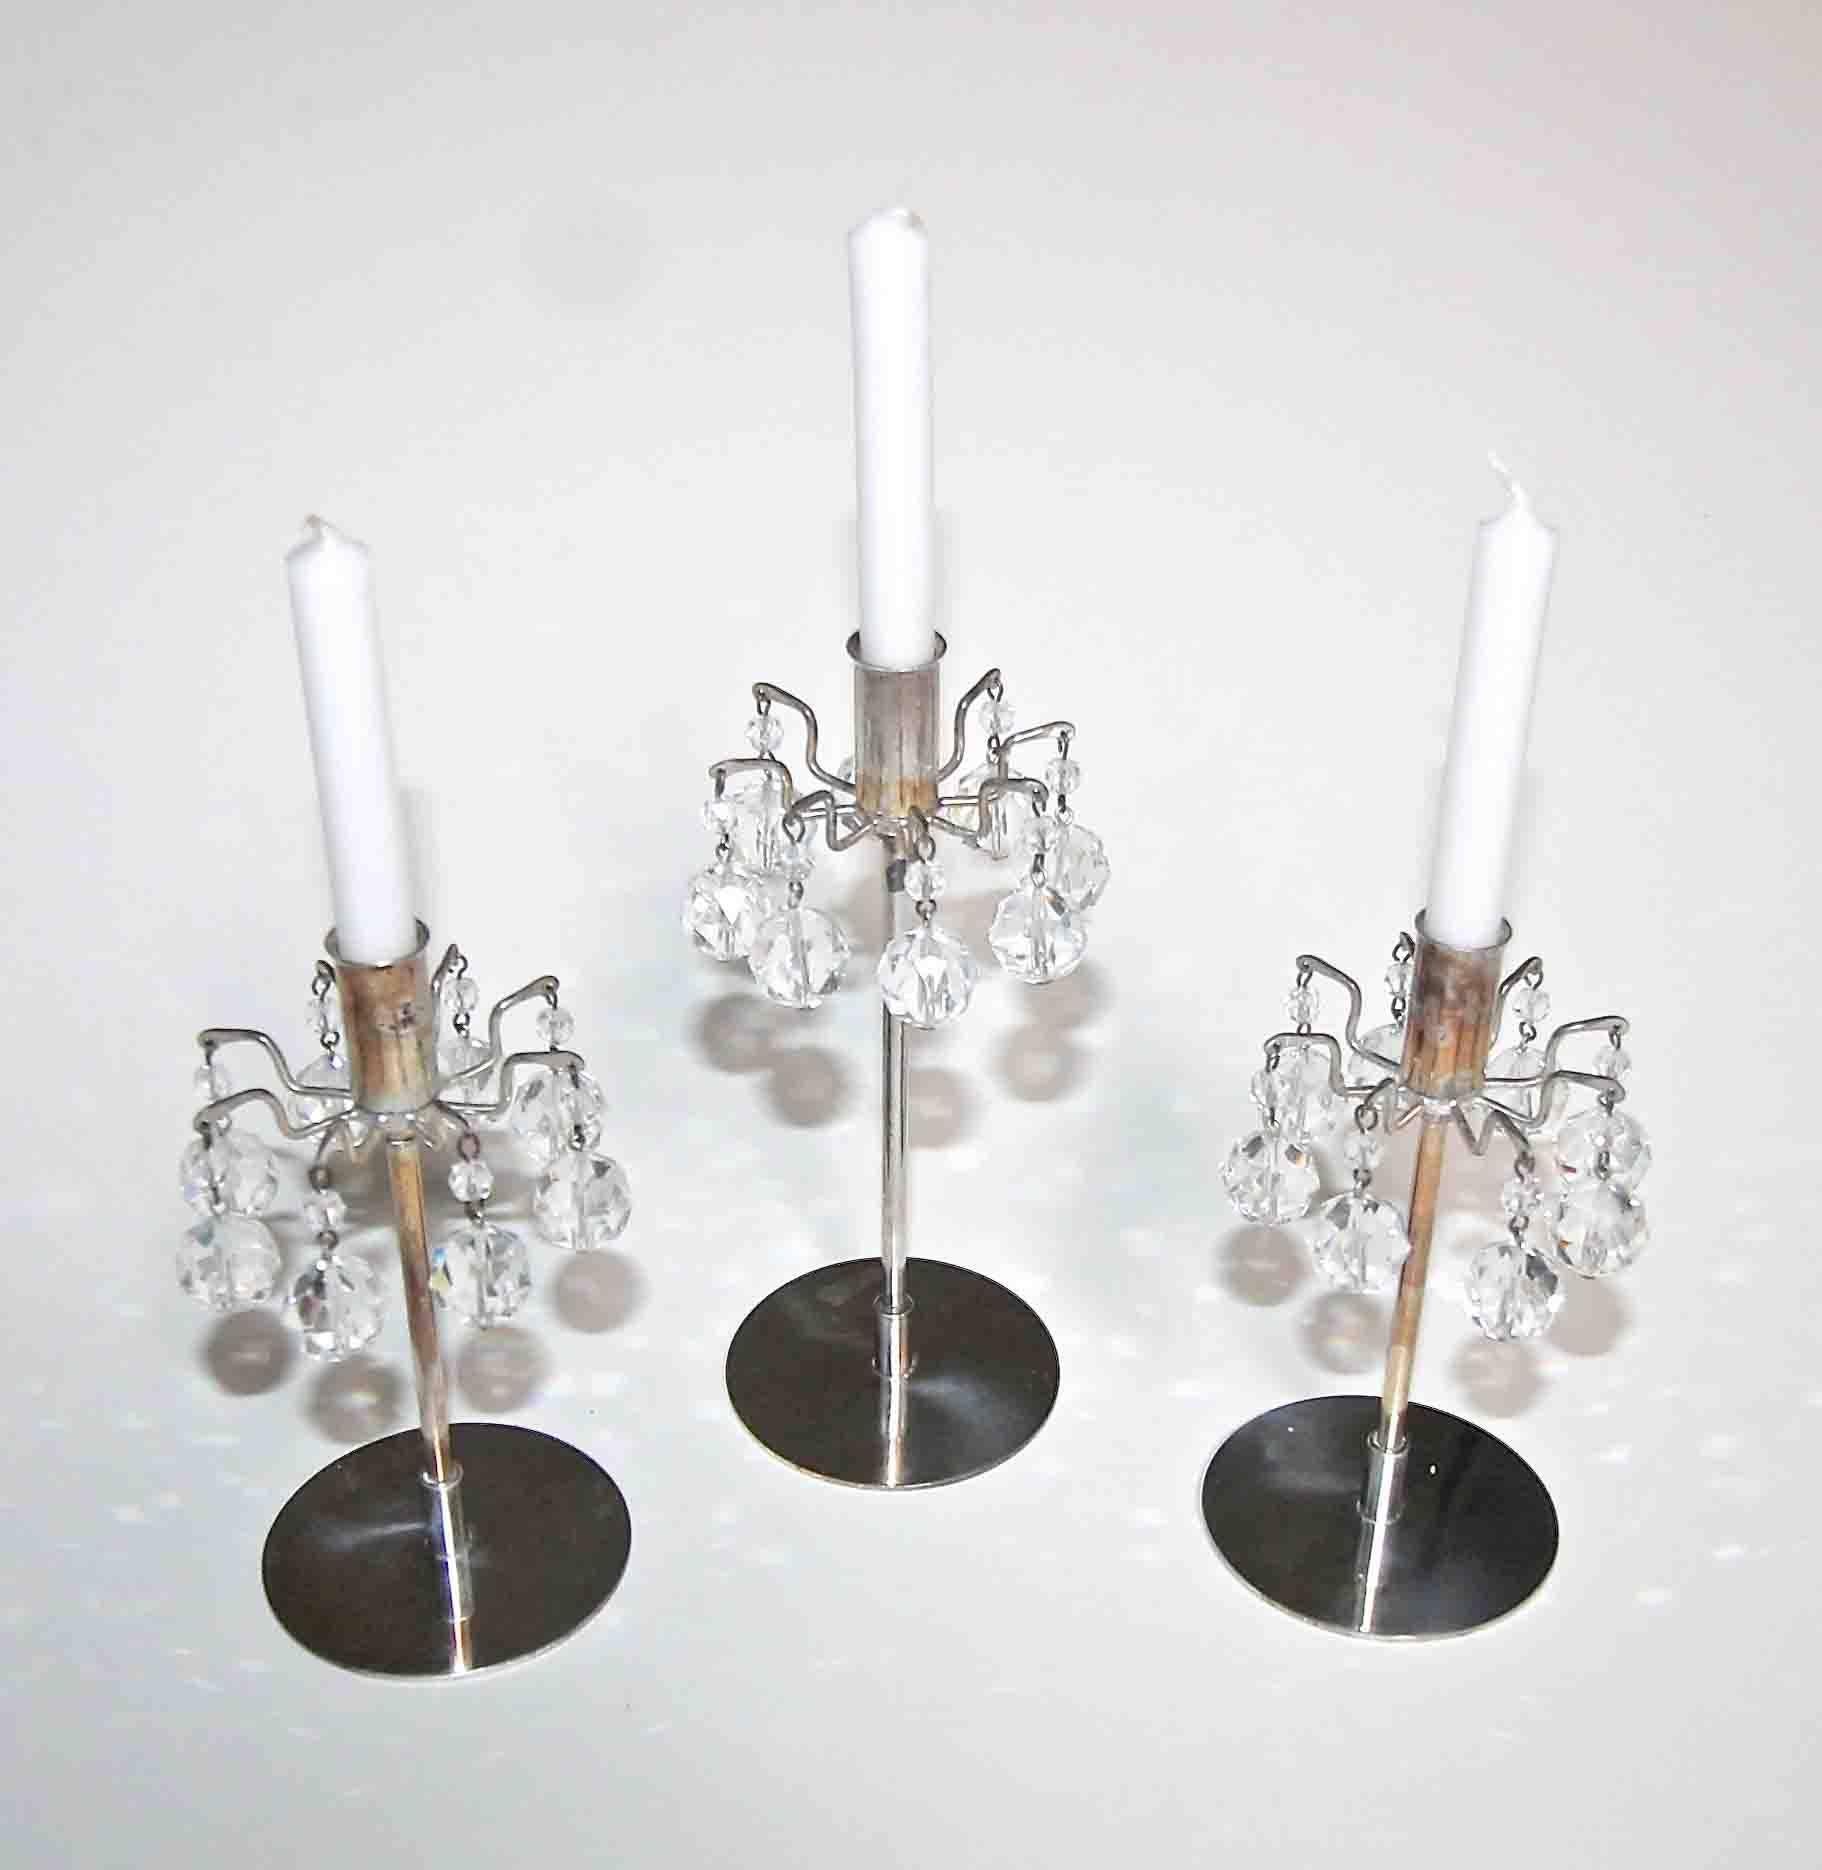 Trio Lobmeyr Diminutive Silver Plate Crystal Candleholders In Good Condition For Sale In Dallas, TX